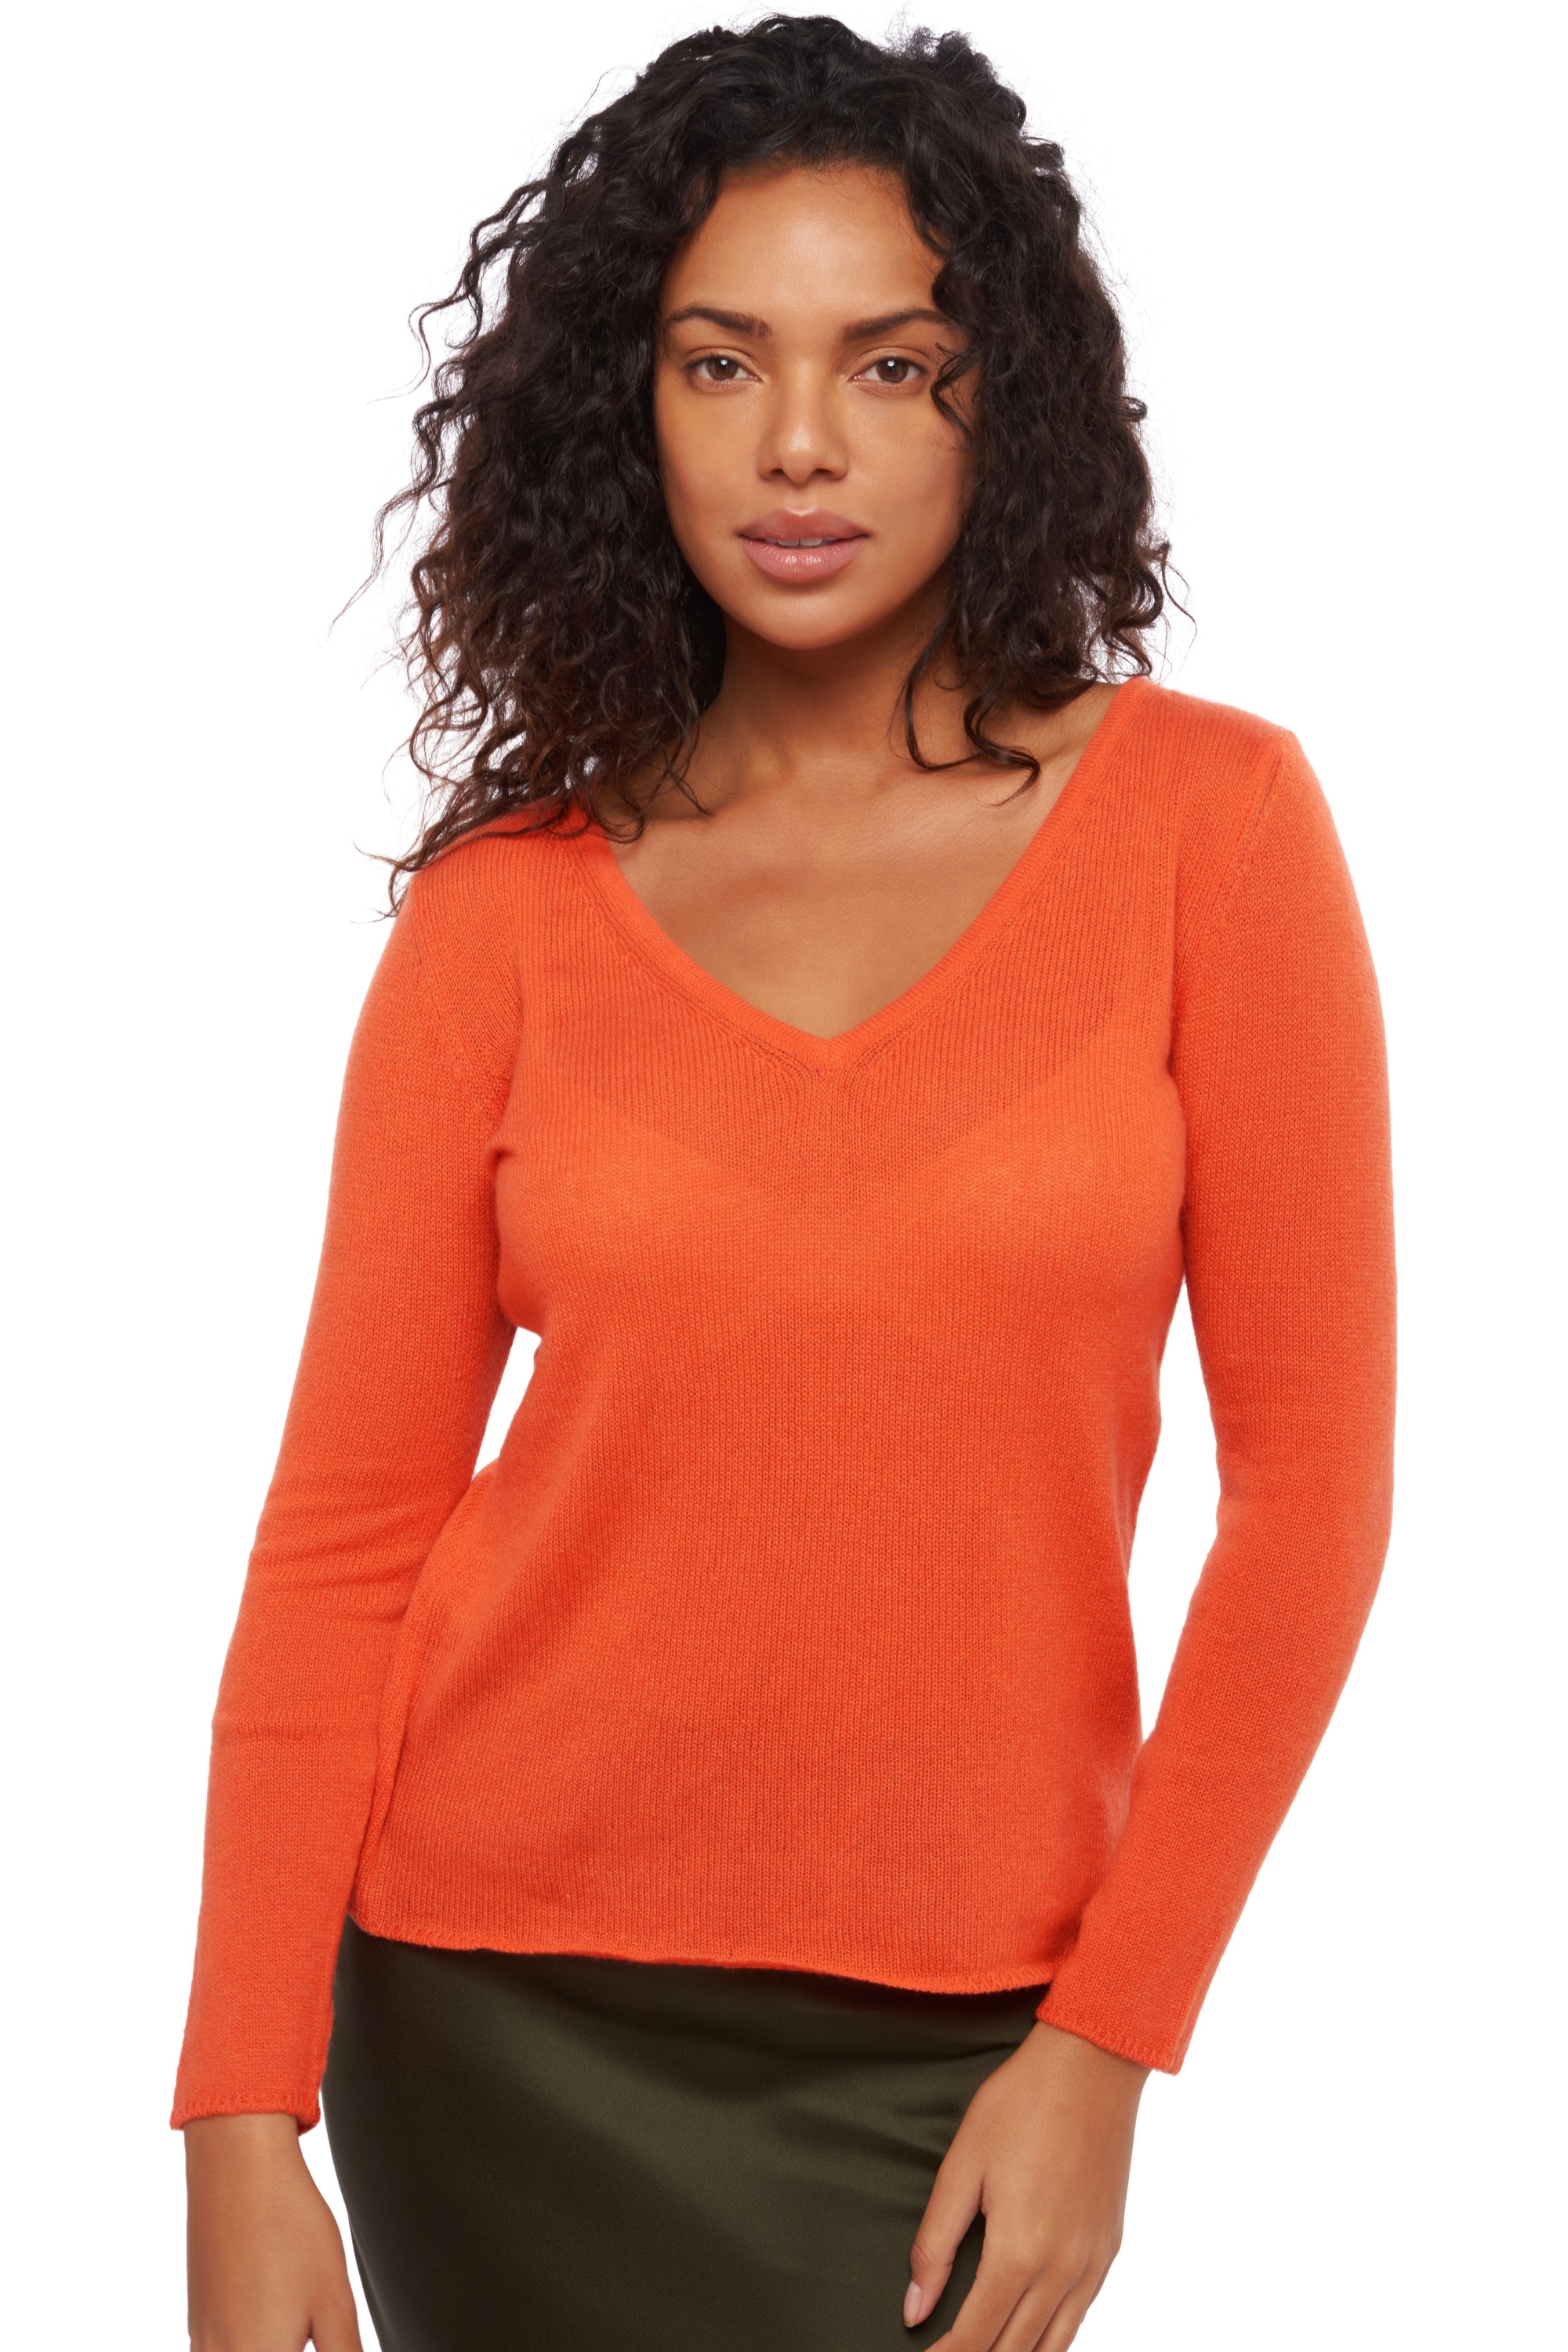 Cashmere ladies basic sweaters at low prices flavie satsuma s